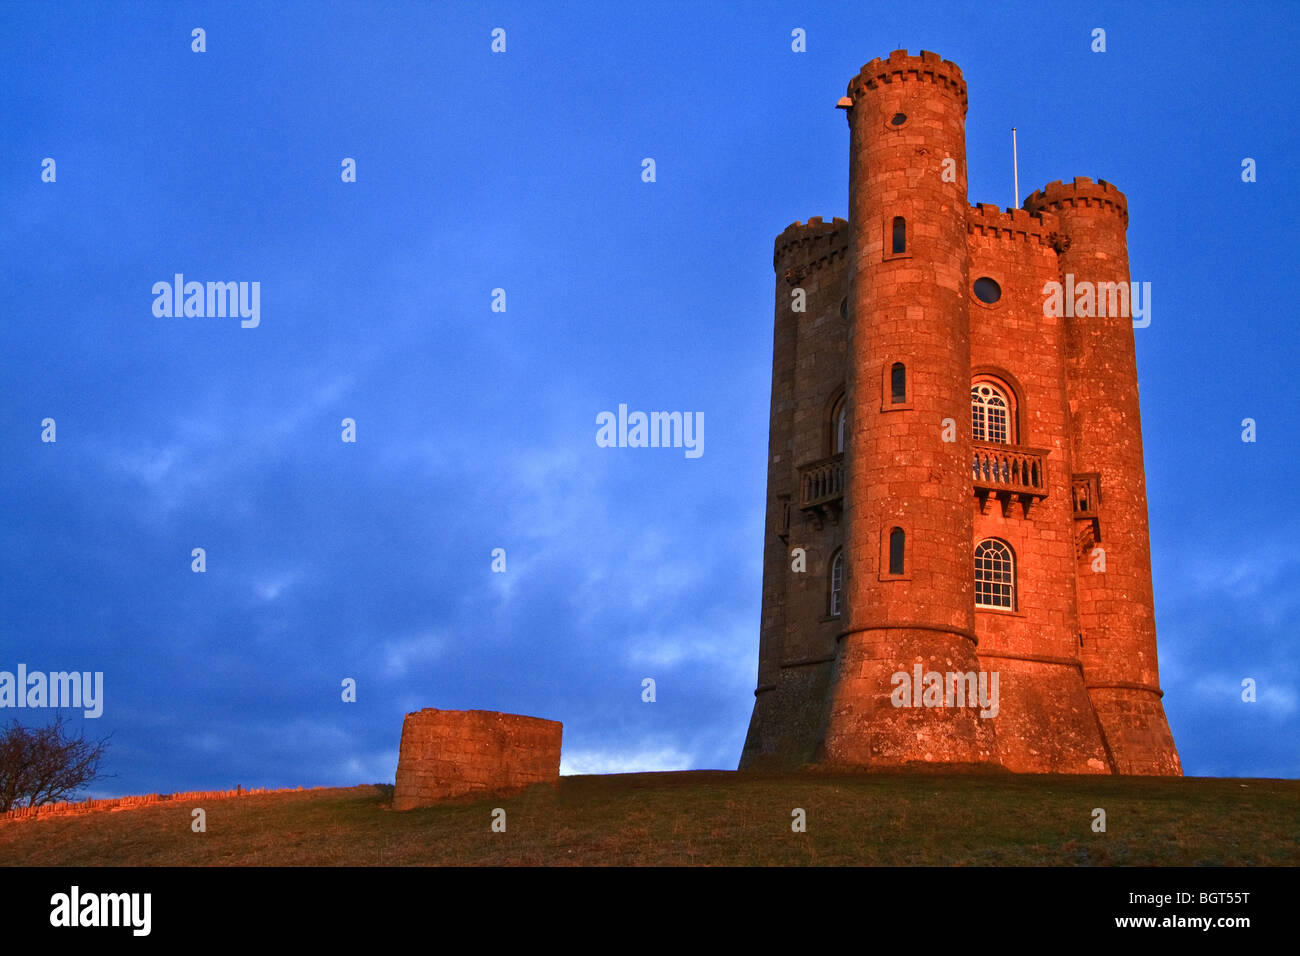 Broadway Tower at sunset near Broadway, Cotswolds, England taken in the evening golden light Stock Photo